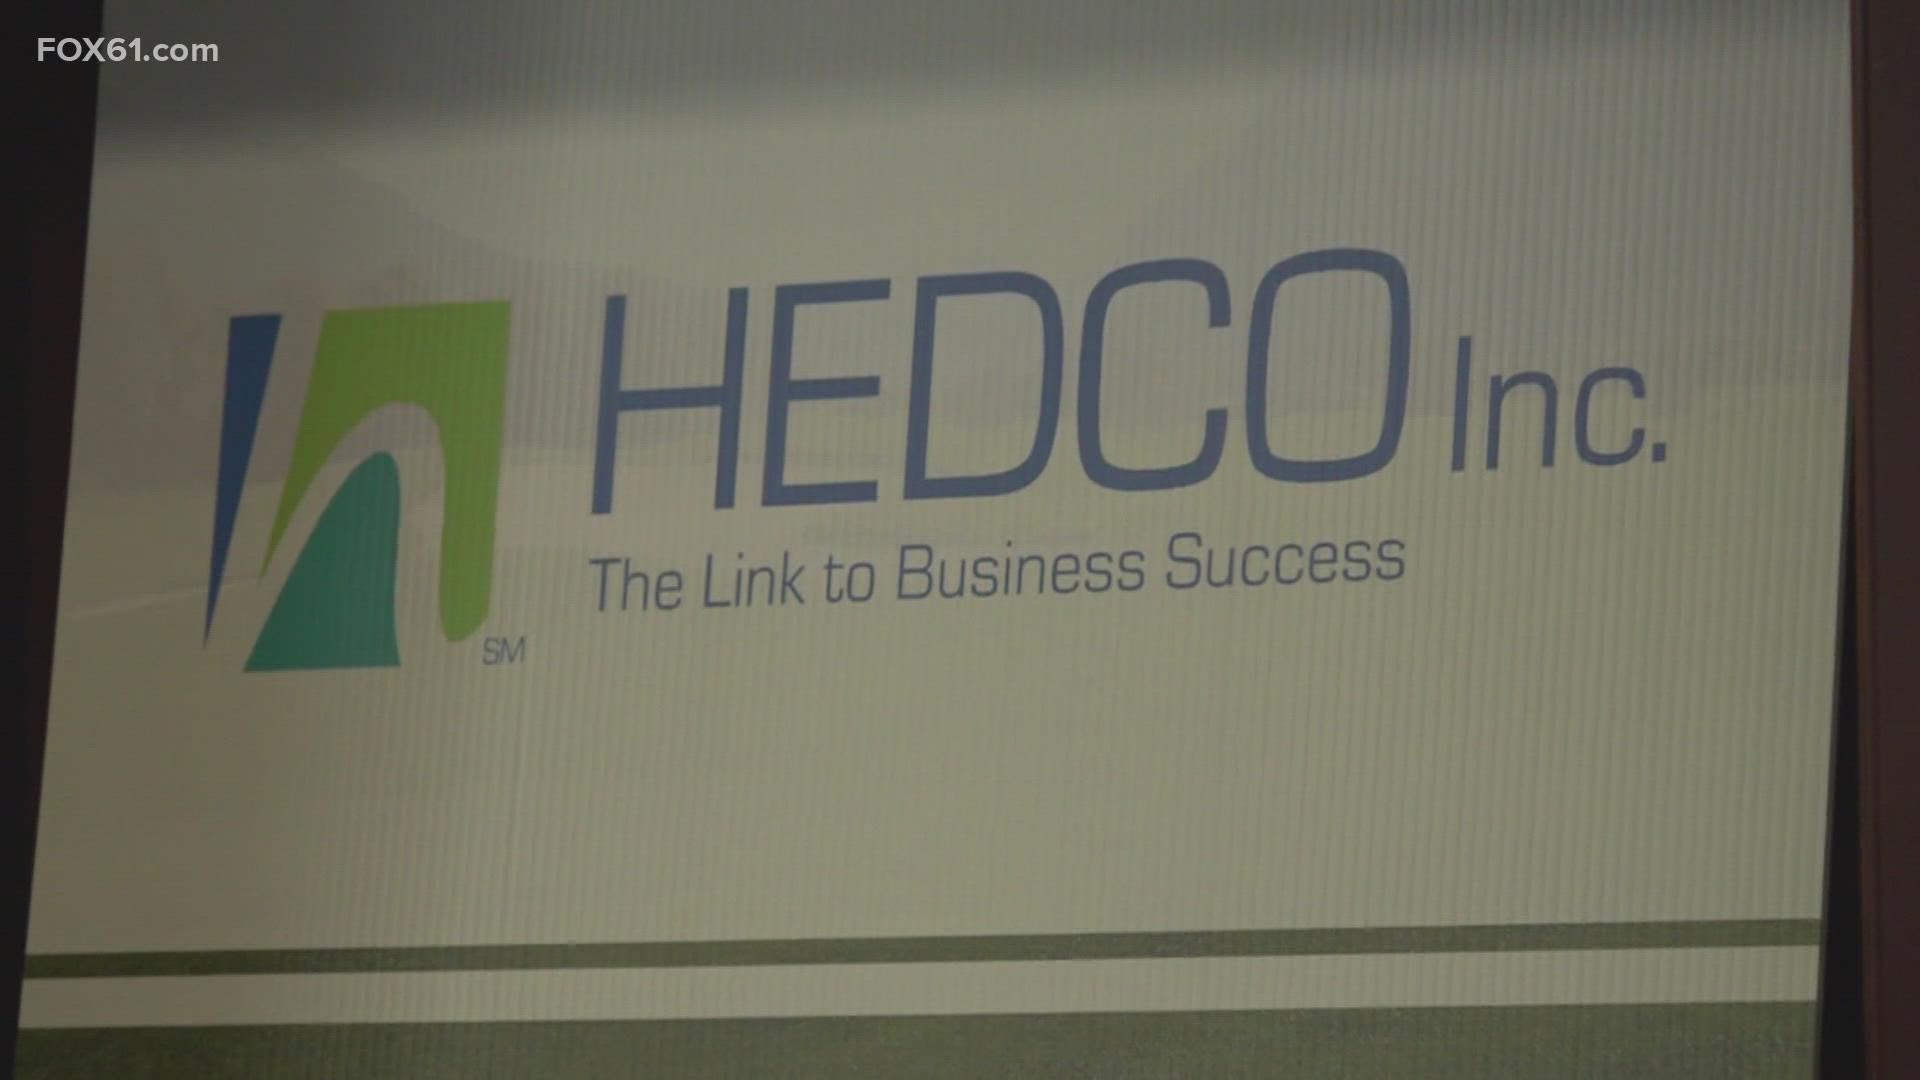 HEDCO gives small businesses what they need to survive